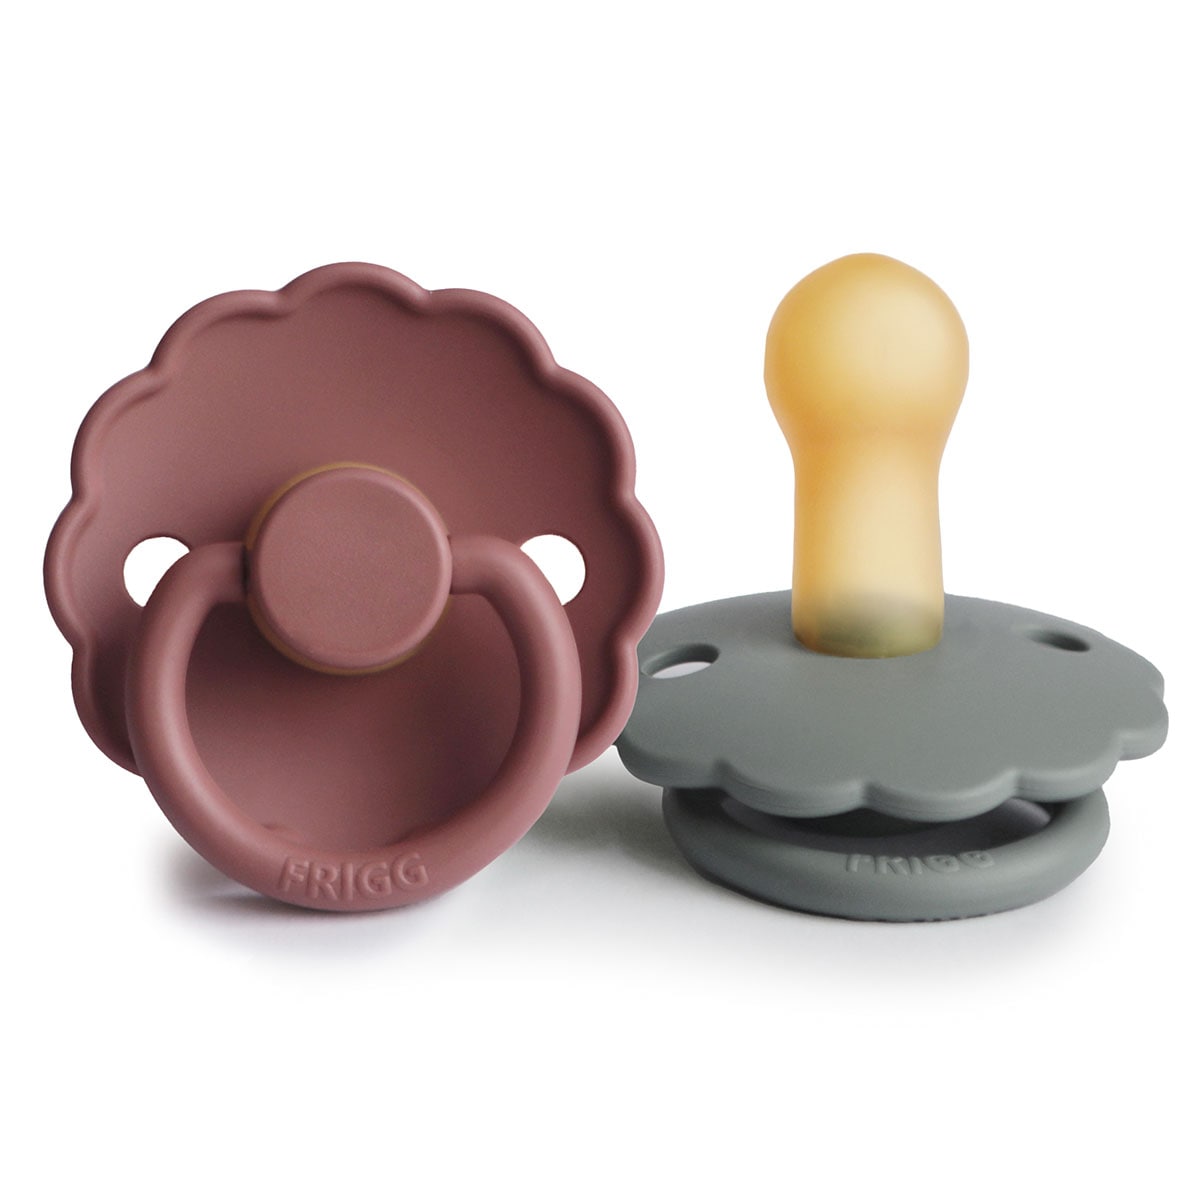 FRIGG 6-18 Months Daisy Pacifier French Gray/Woodchuck 2 Pack